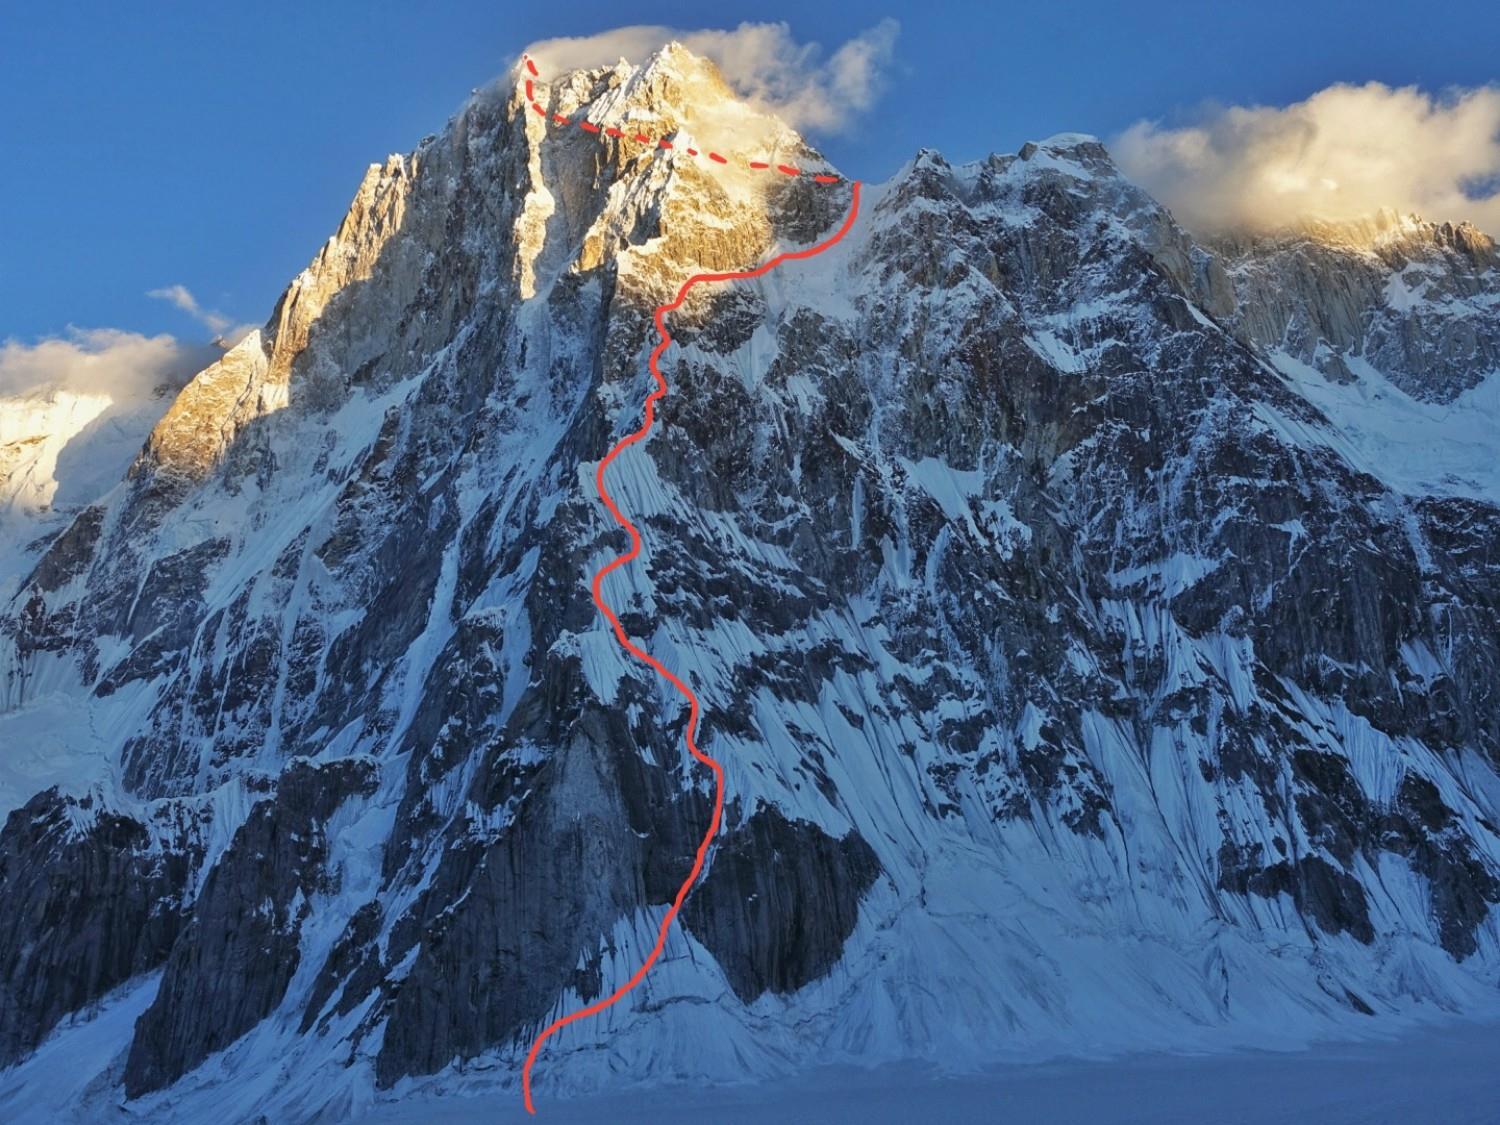 The red line shows the route taken by Cesen, Livingstone and Strazar. [Image] Tom Livingstone